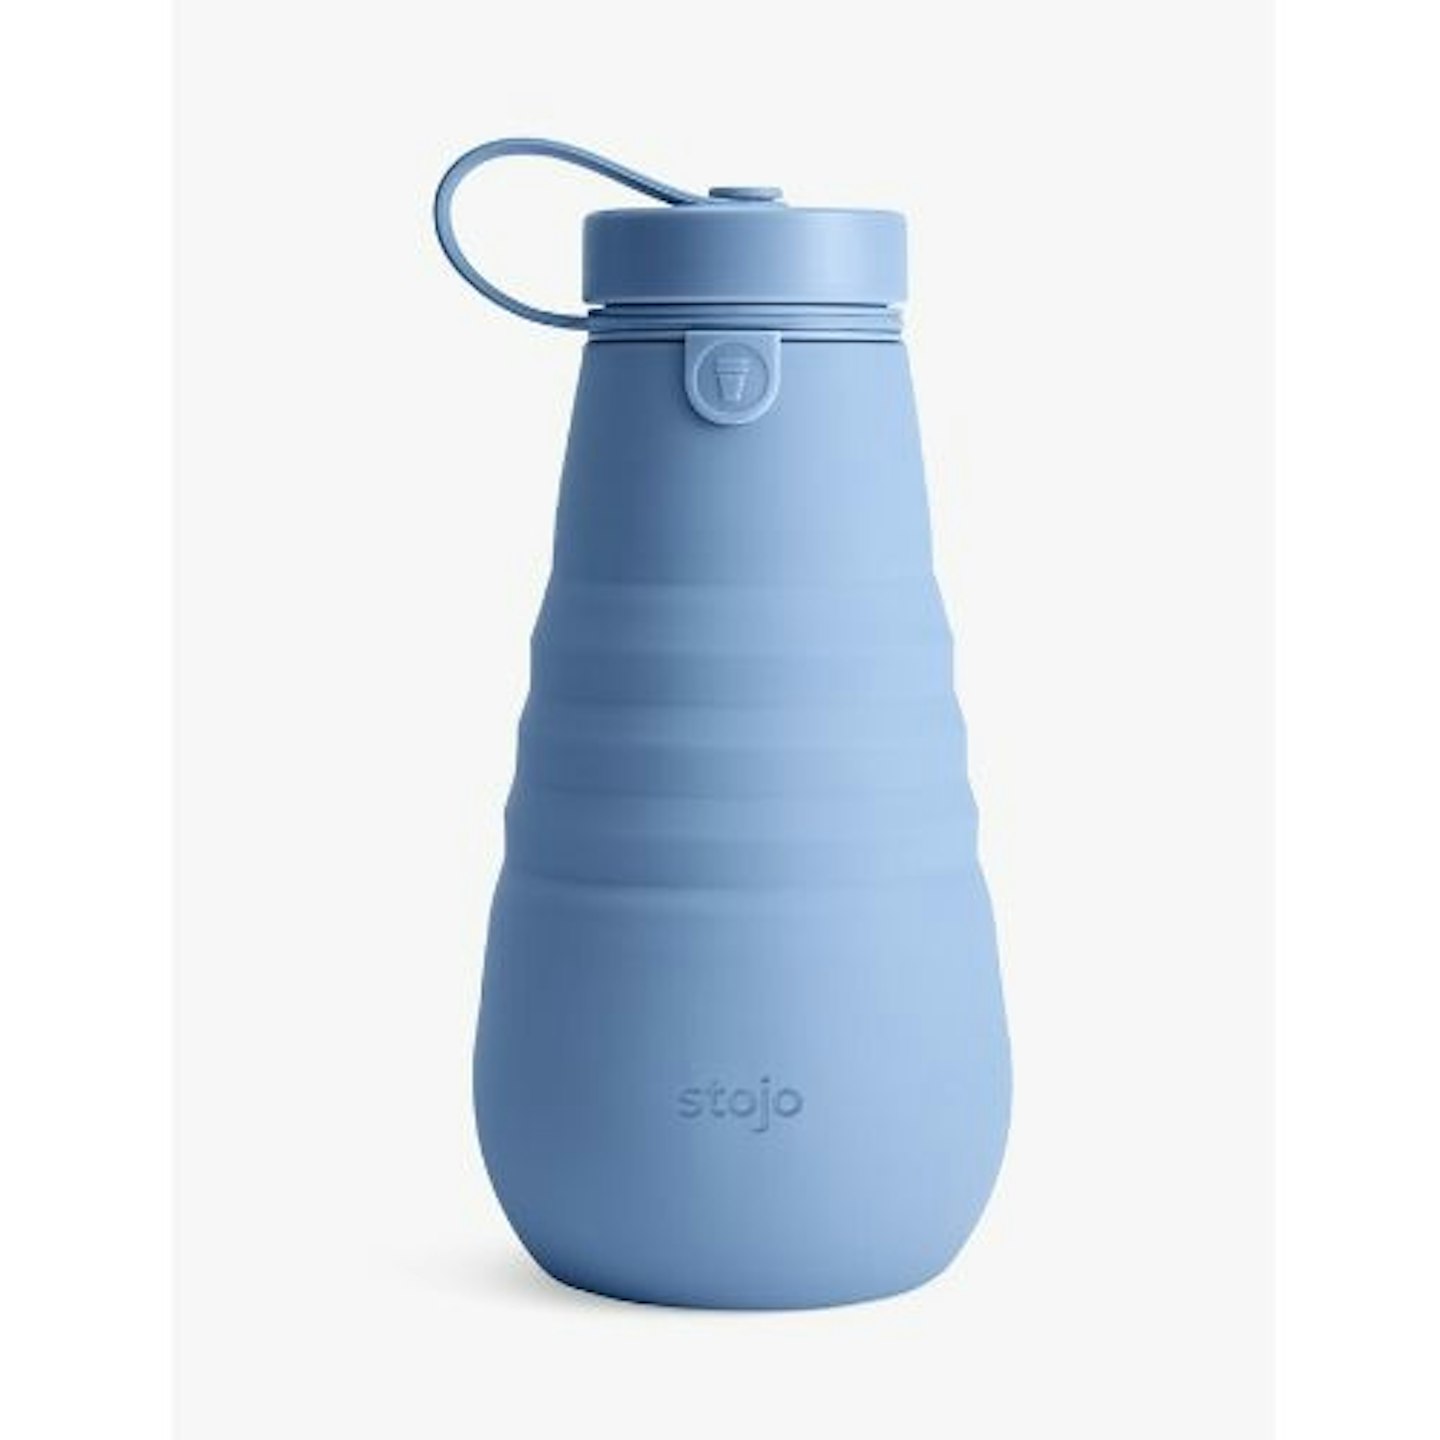 Stojo Collapsible Reusable Silicone Drinks Bottle